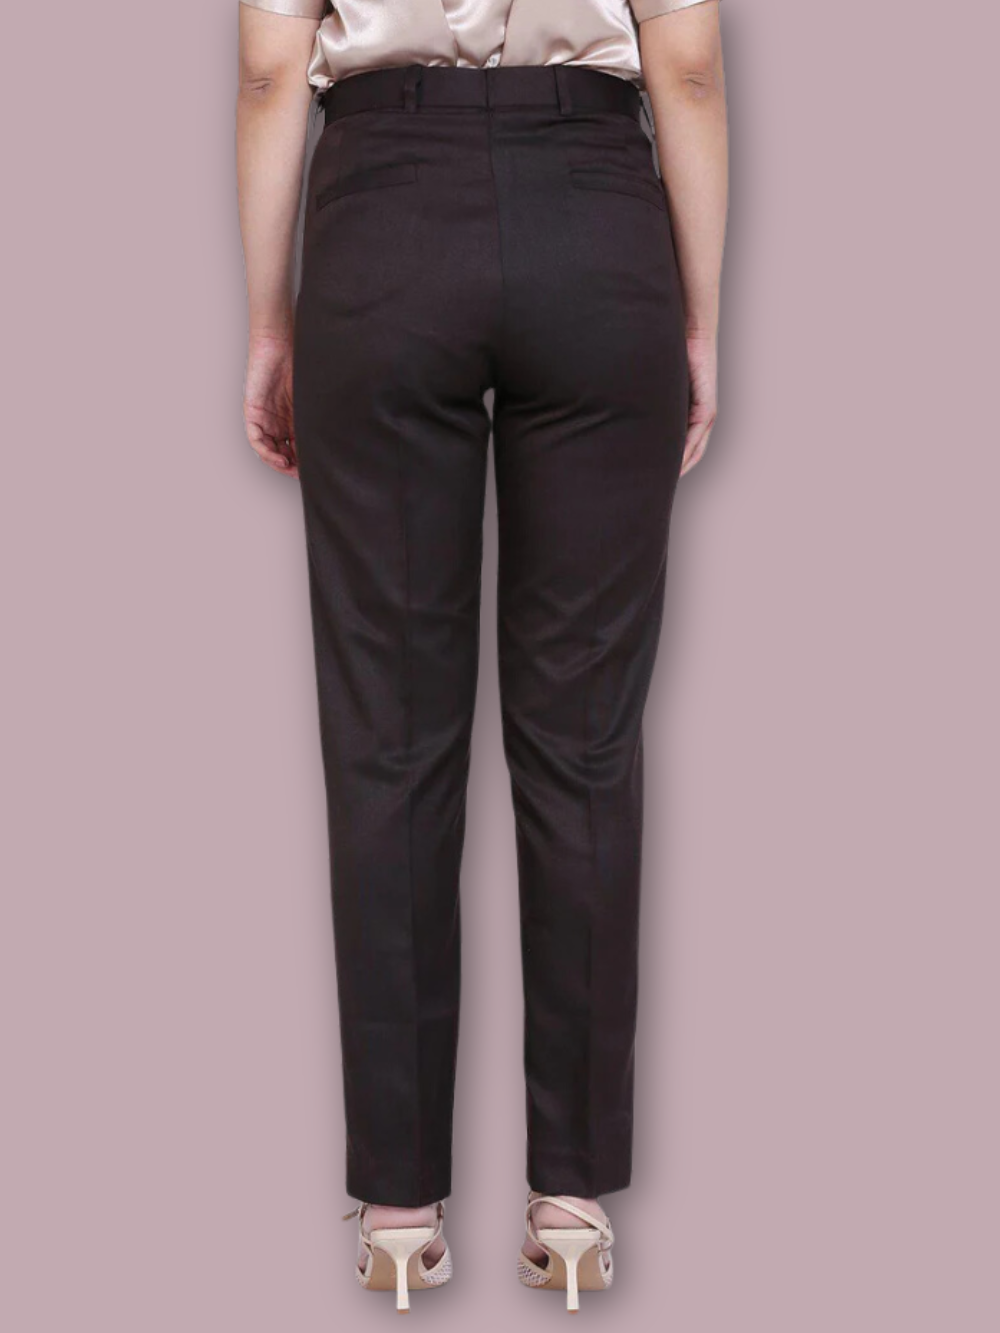 Poly Cotton Trouser - Chocolate Brown